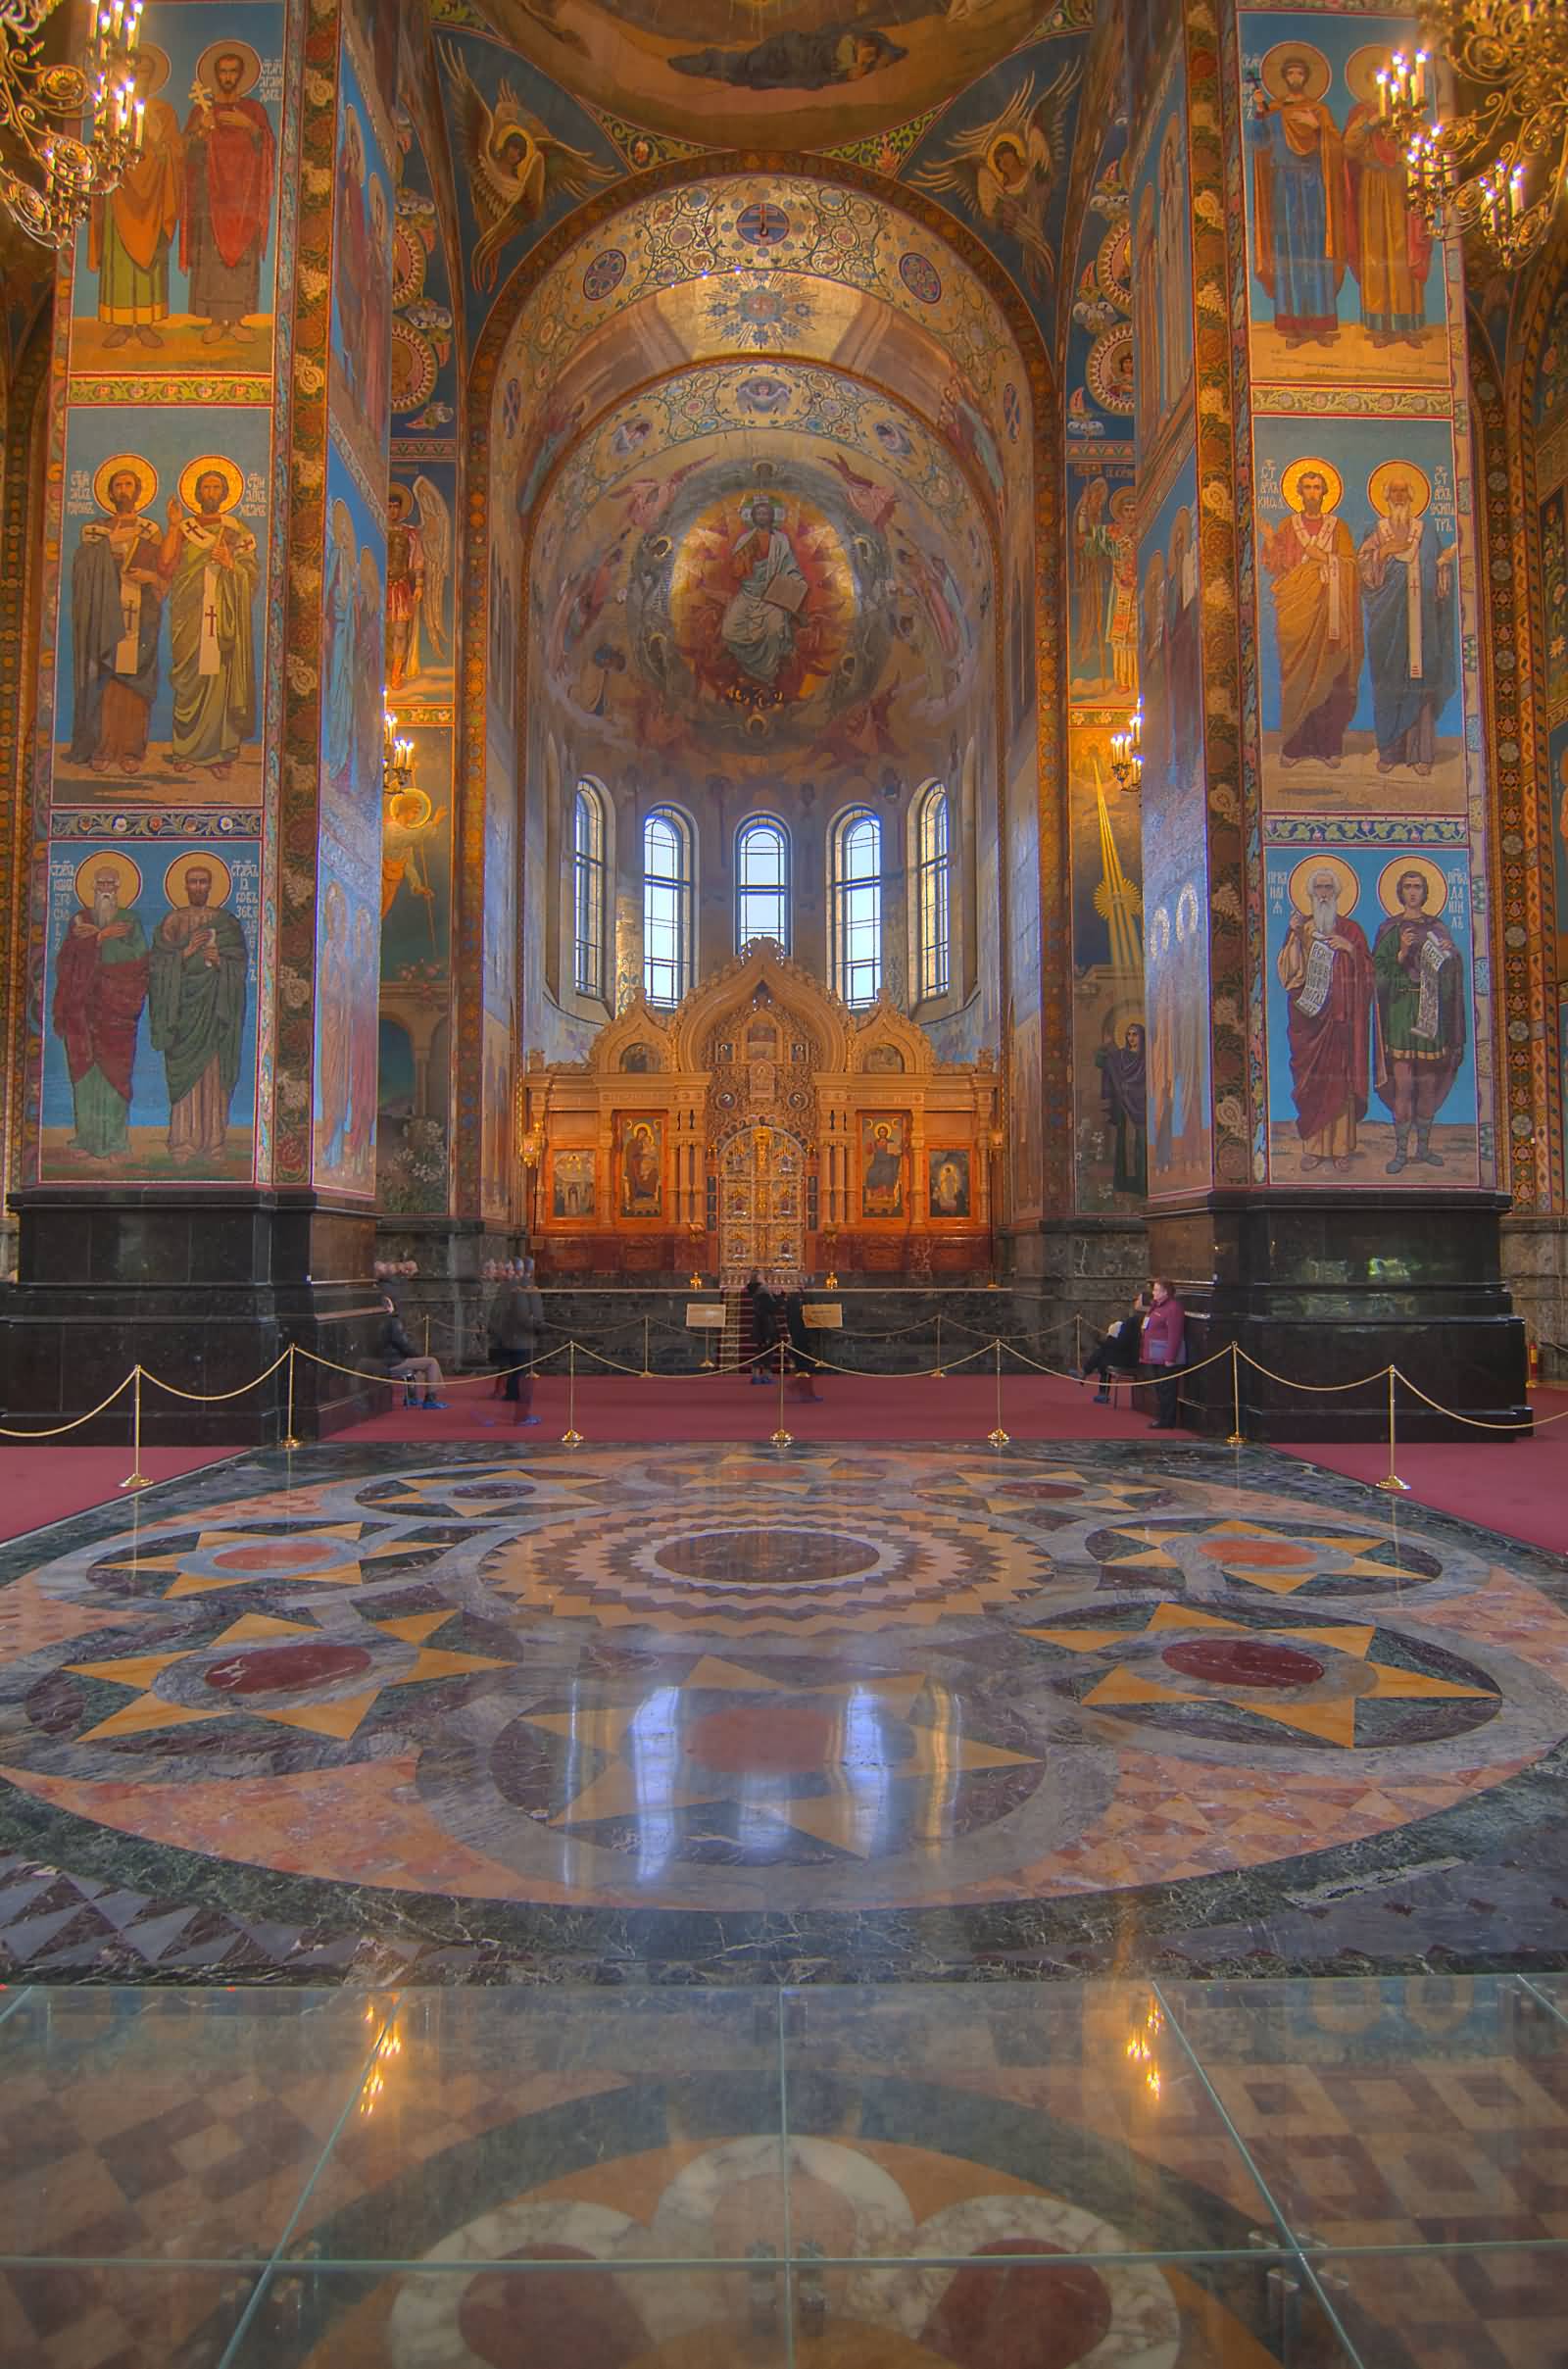 50+ Most Adorable Inside Pictures Of The Church Of The Savior On Blood